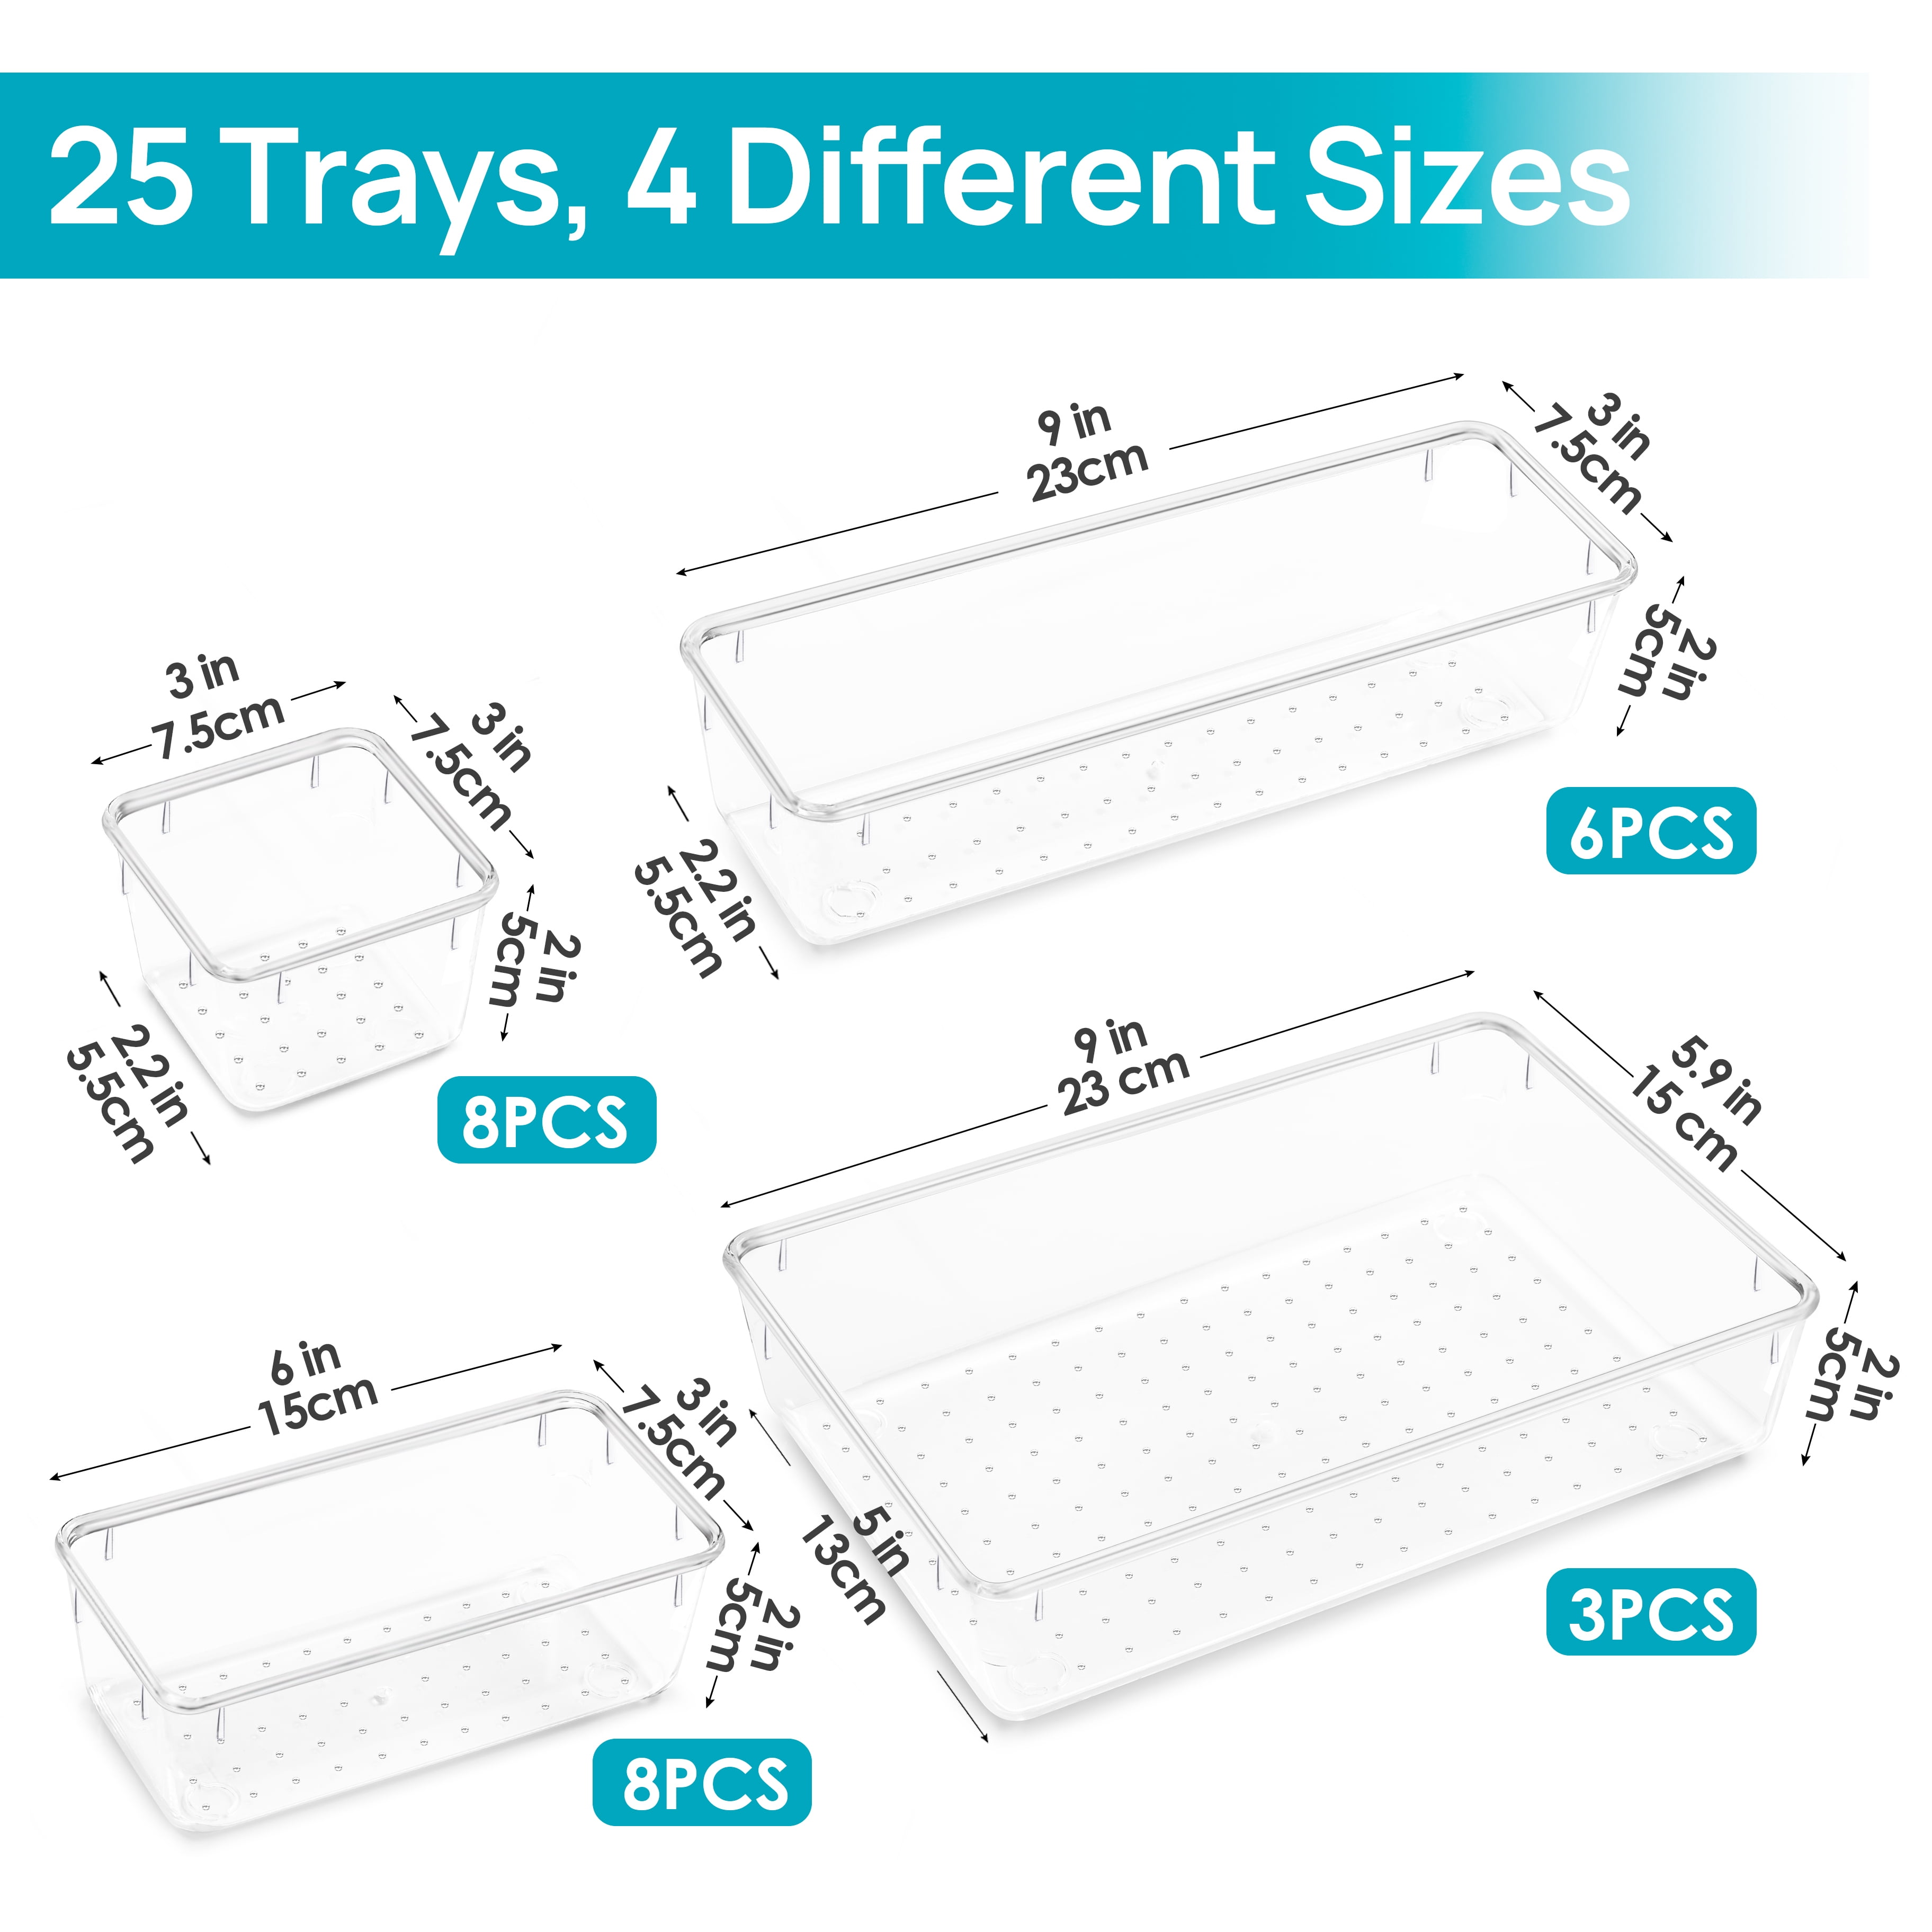 RUBOXA ruboxa clear drawer organizer, [25 pcs] clear plastic drawer  organizers for home organization and storage, including 4 sizes